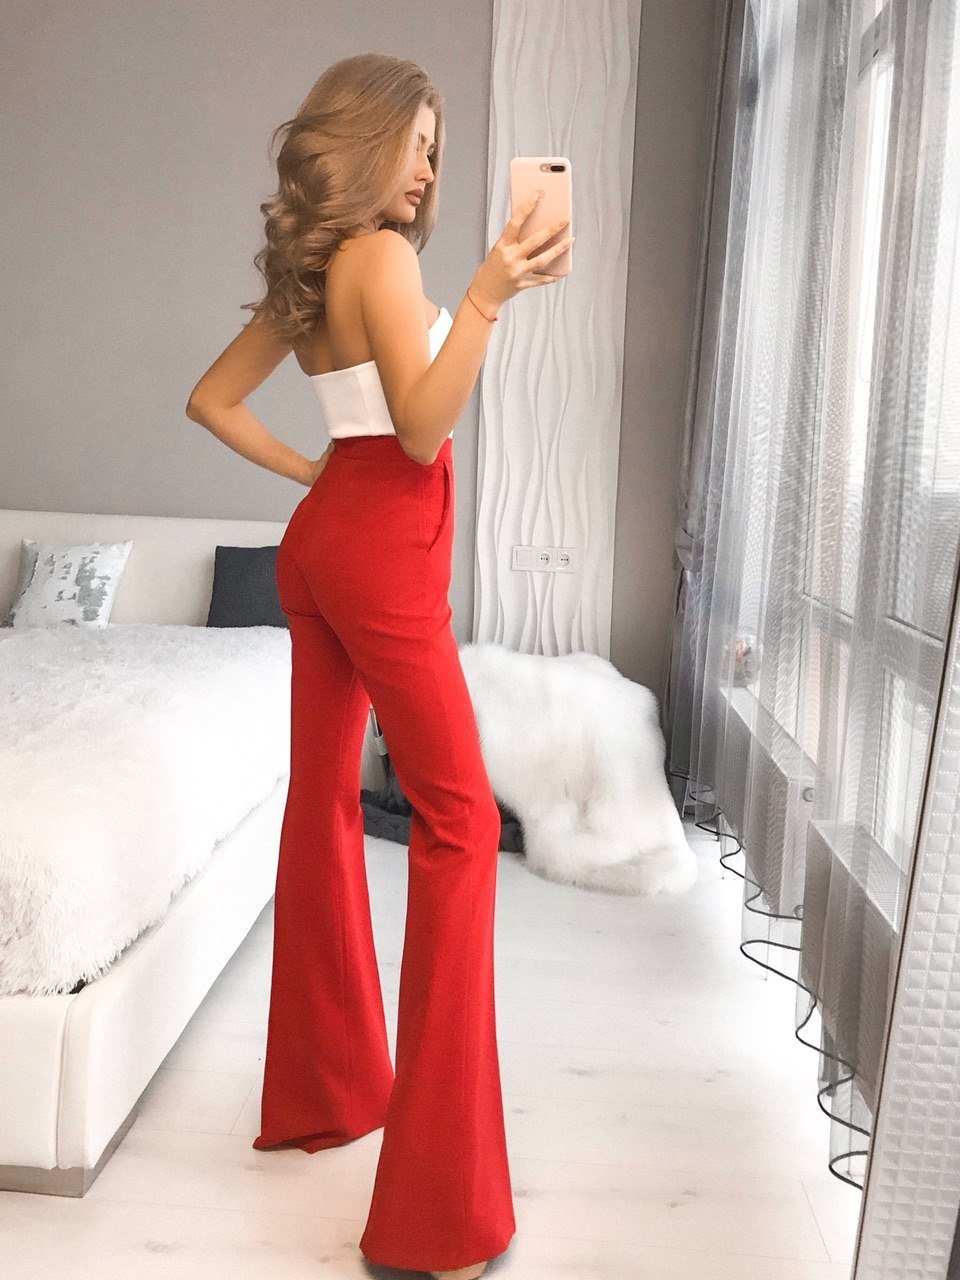 Red High Waist Fitted Flared Pants